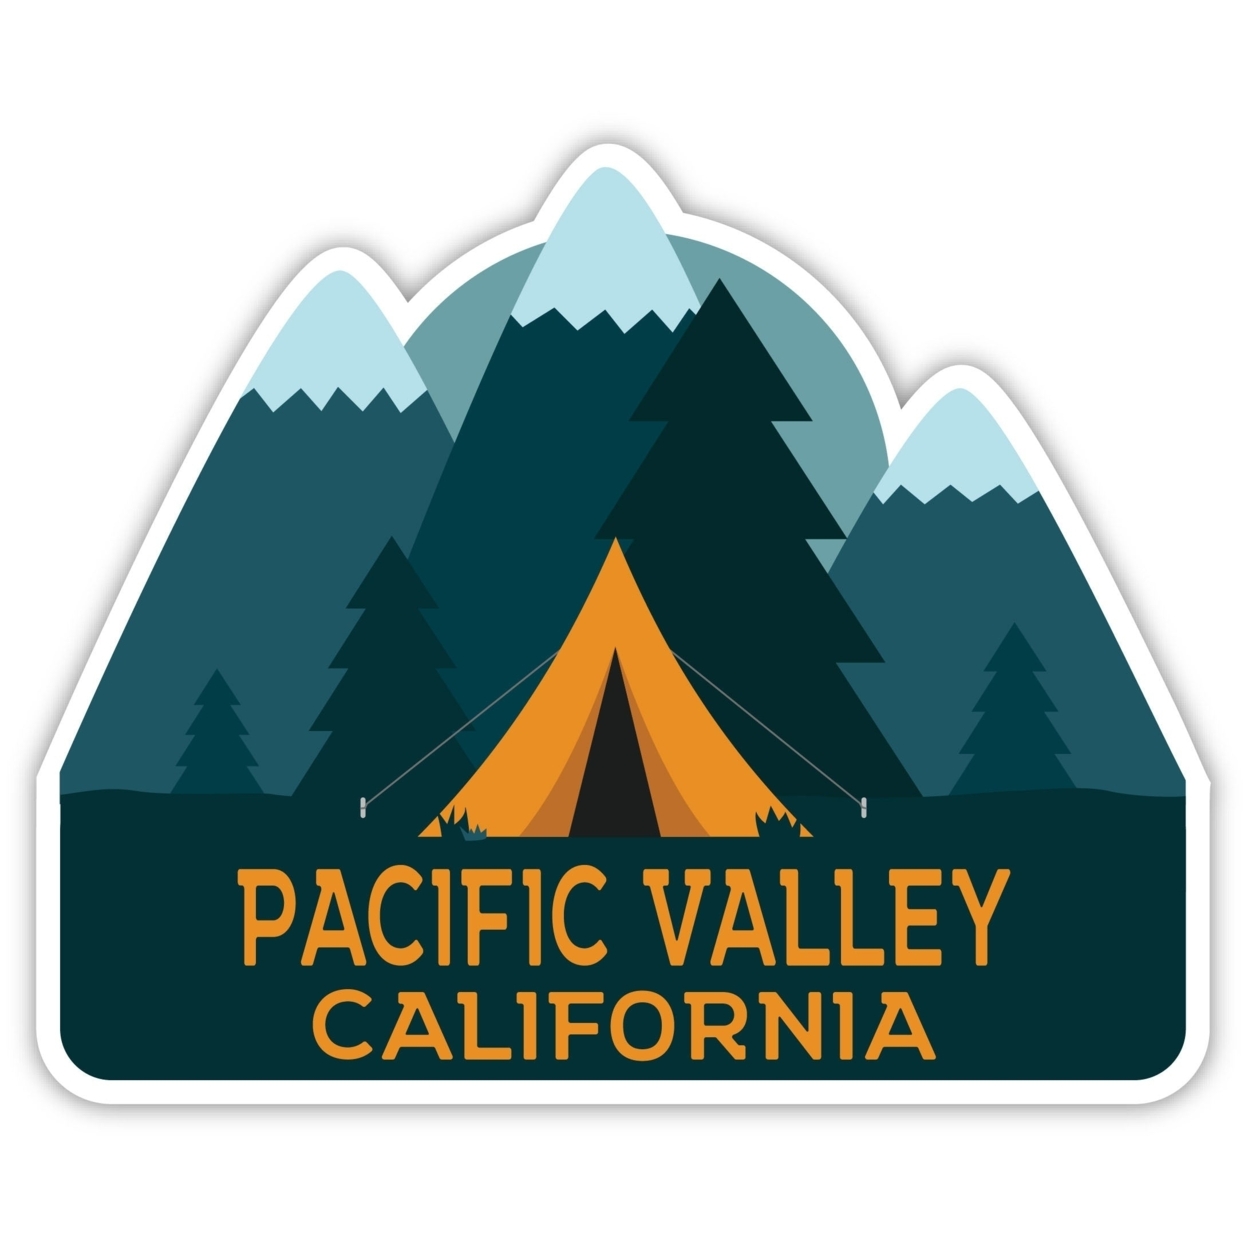 Pacific Valley California Souvenir Decorative Stickers (Choose Theme And Size) - Single Unit, 2-Inch, Tent